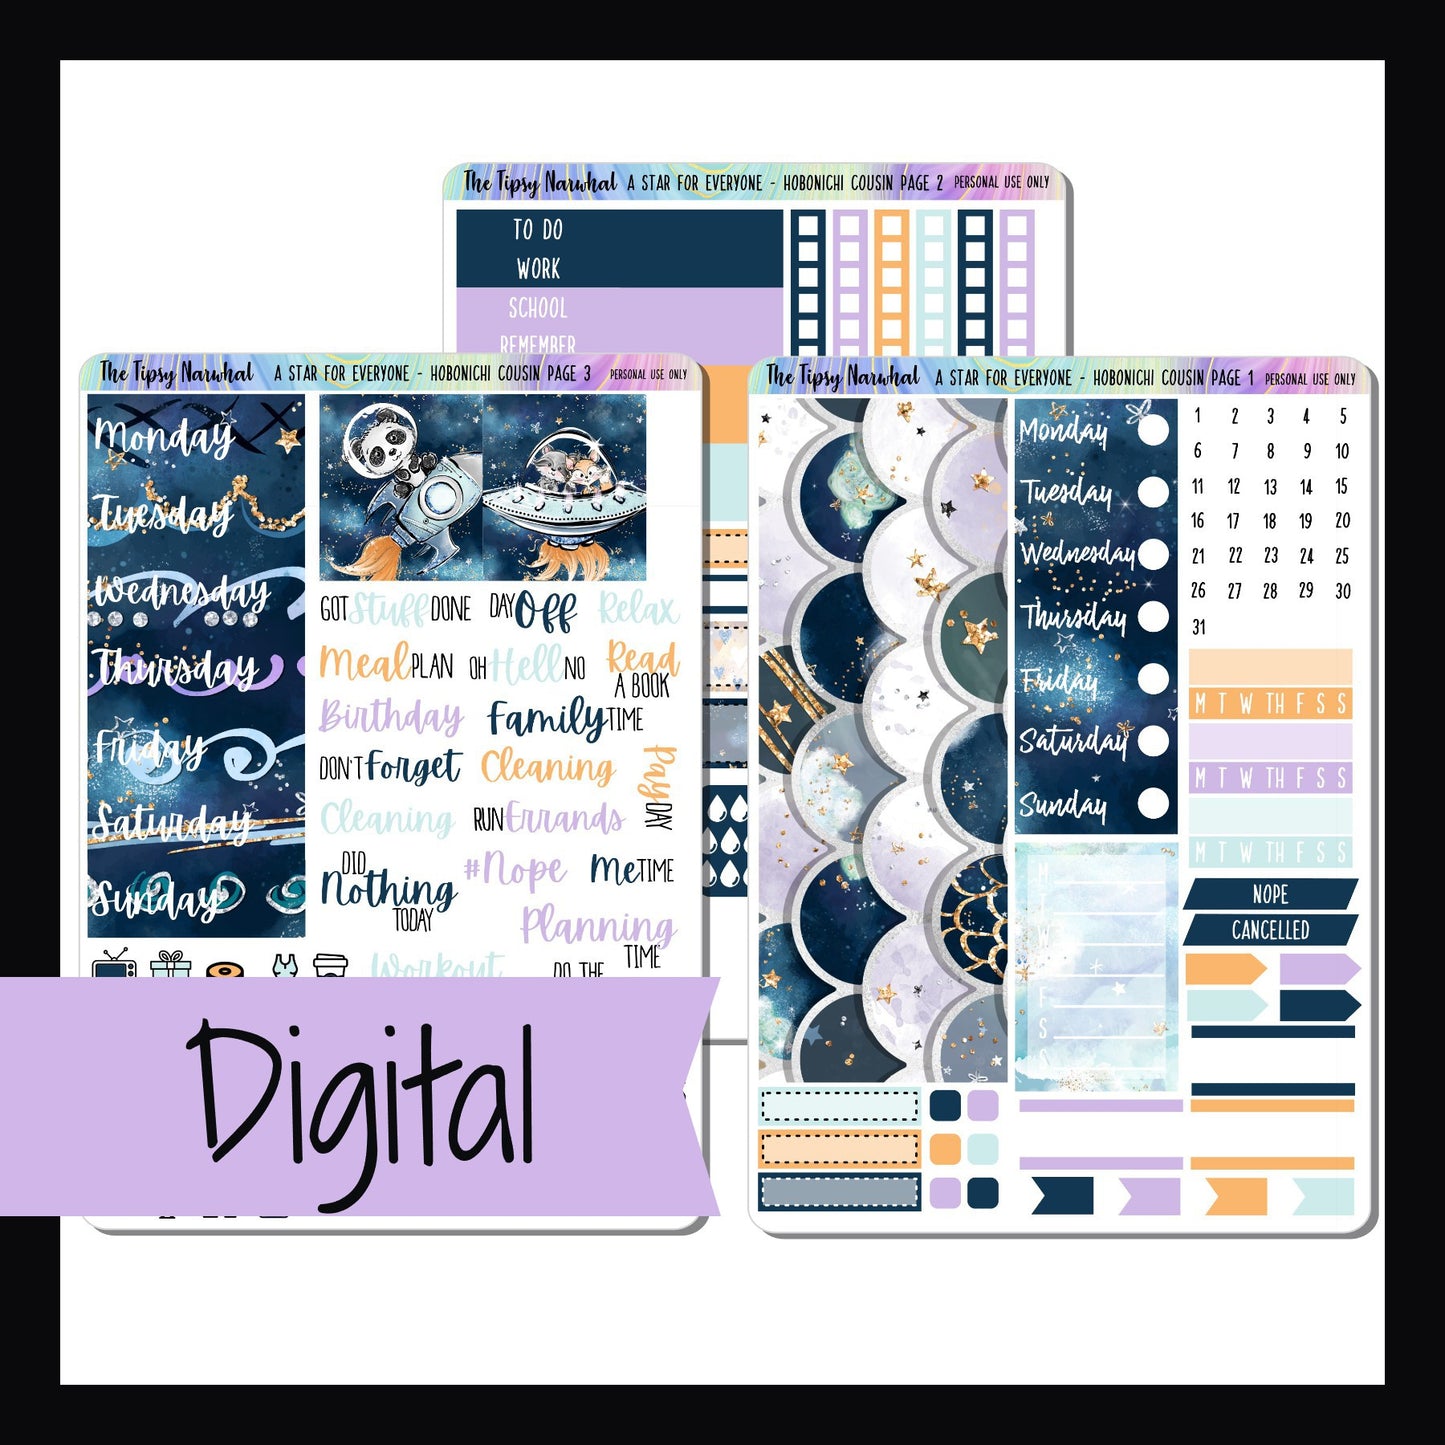 Digital A Star For Everyone Hobonichi Cousin kit is a digital printable version of the A Star For Everyone Hobonichi Cousin Kit.  It's a 3 page sticker kit sized to fit the Hobonichi Cousin 